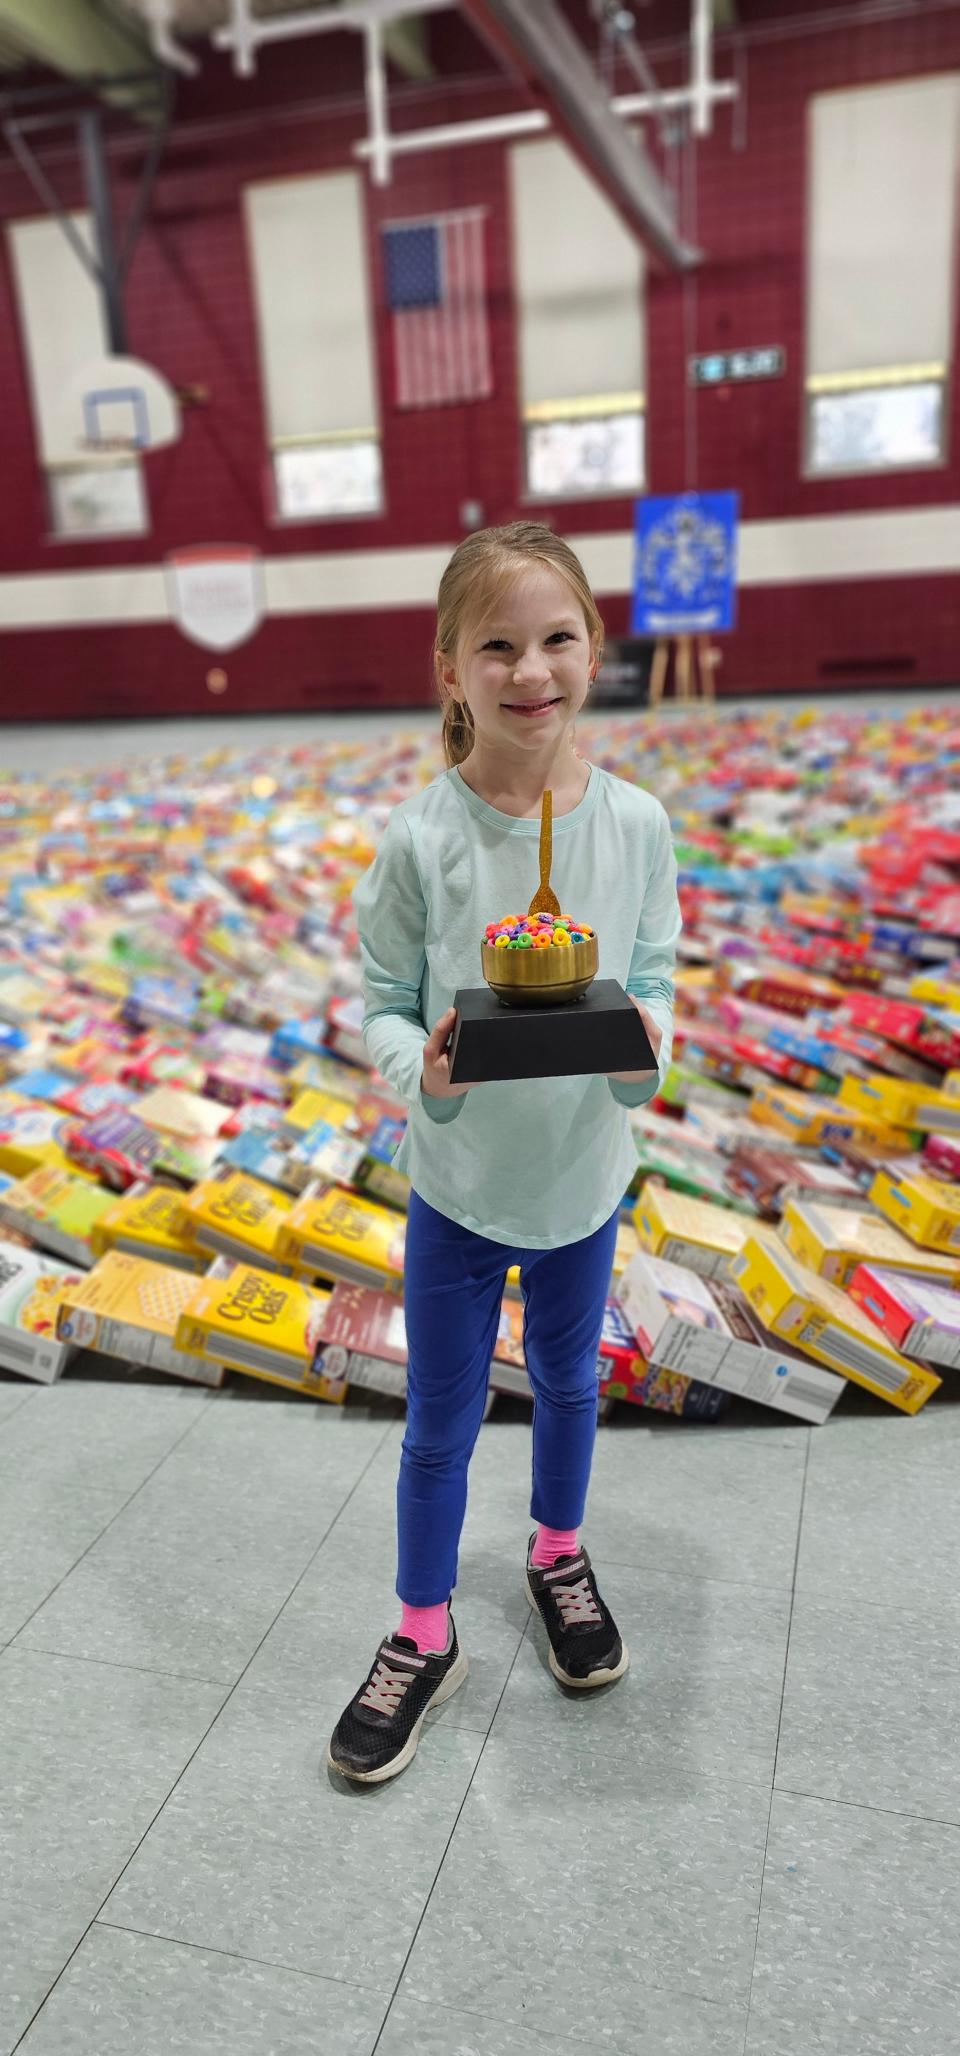 Second-grader Amelia Sorge poses with the "golden cereal bowl," the ultimate prize of Baden Academy's Cereal Bowl competition.